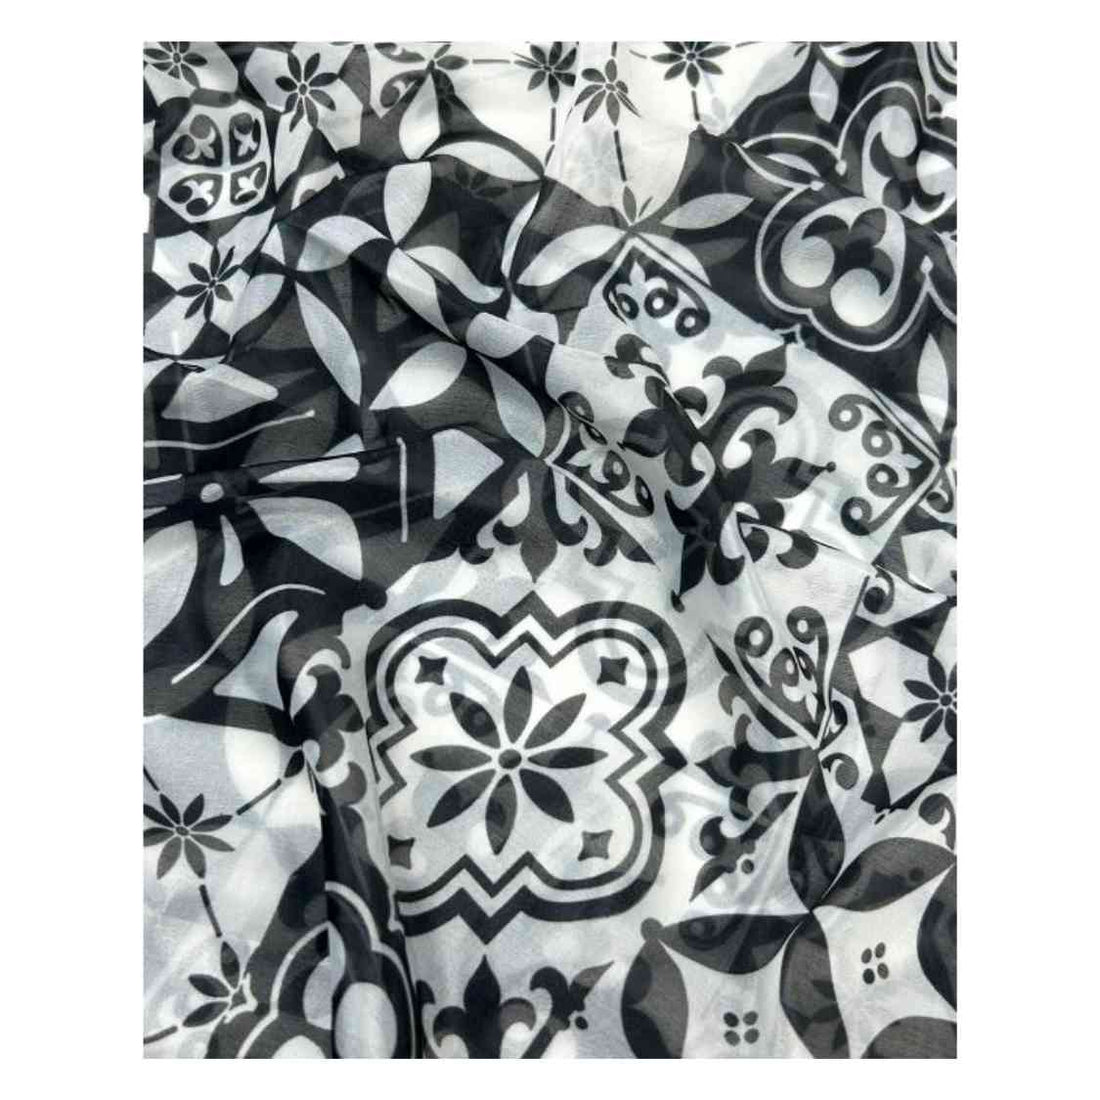 Tissue Silk Scarf, Black And White Printed Pattern